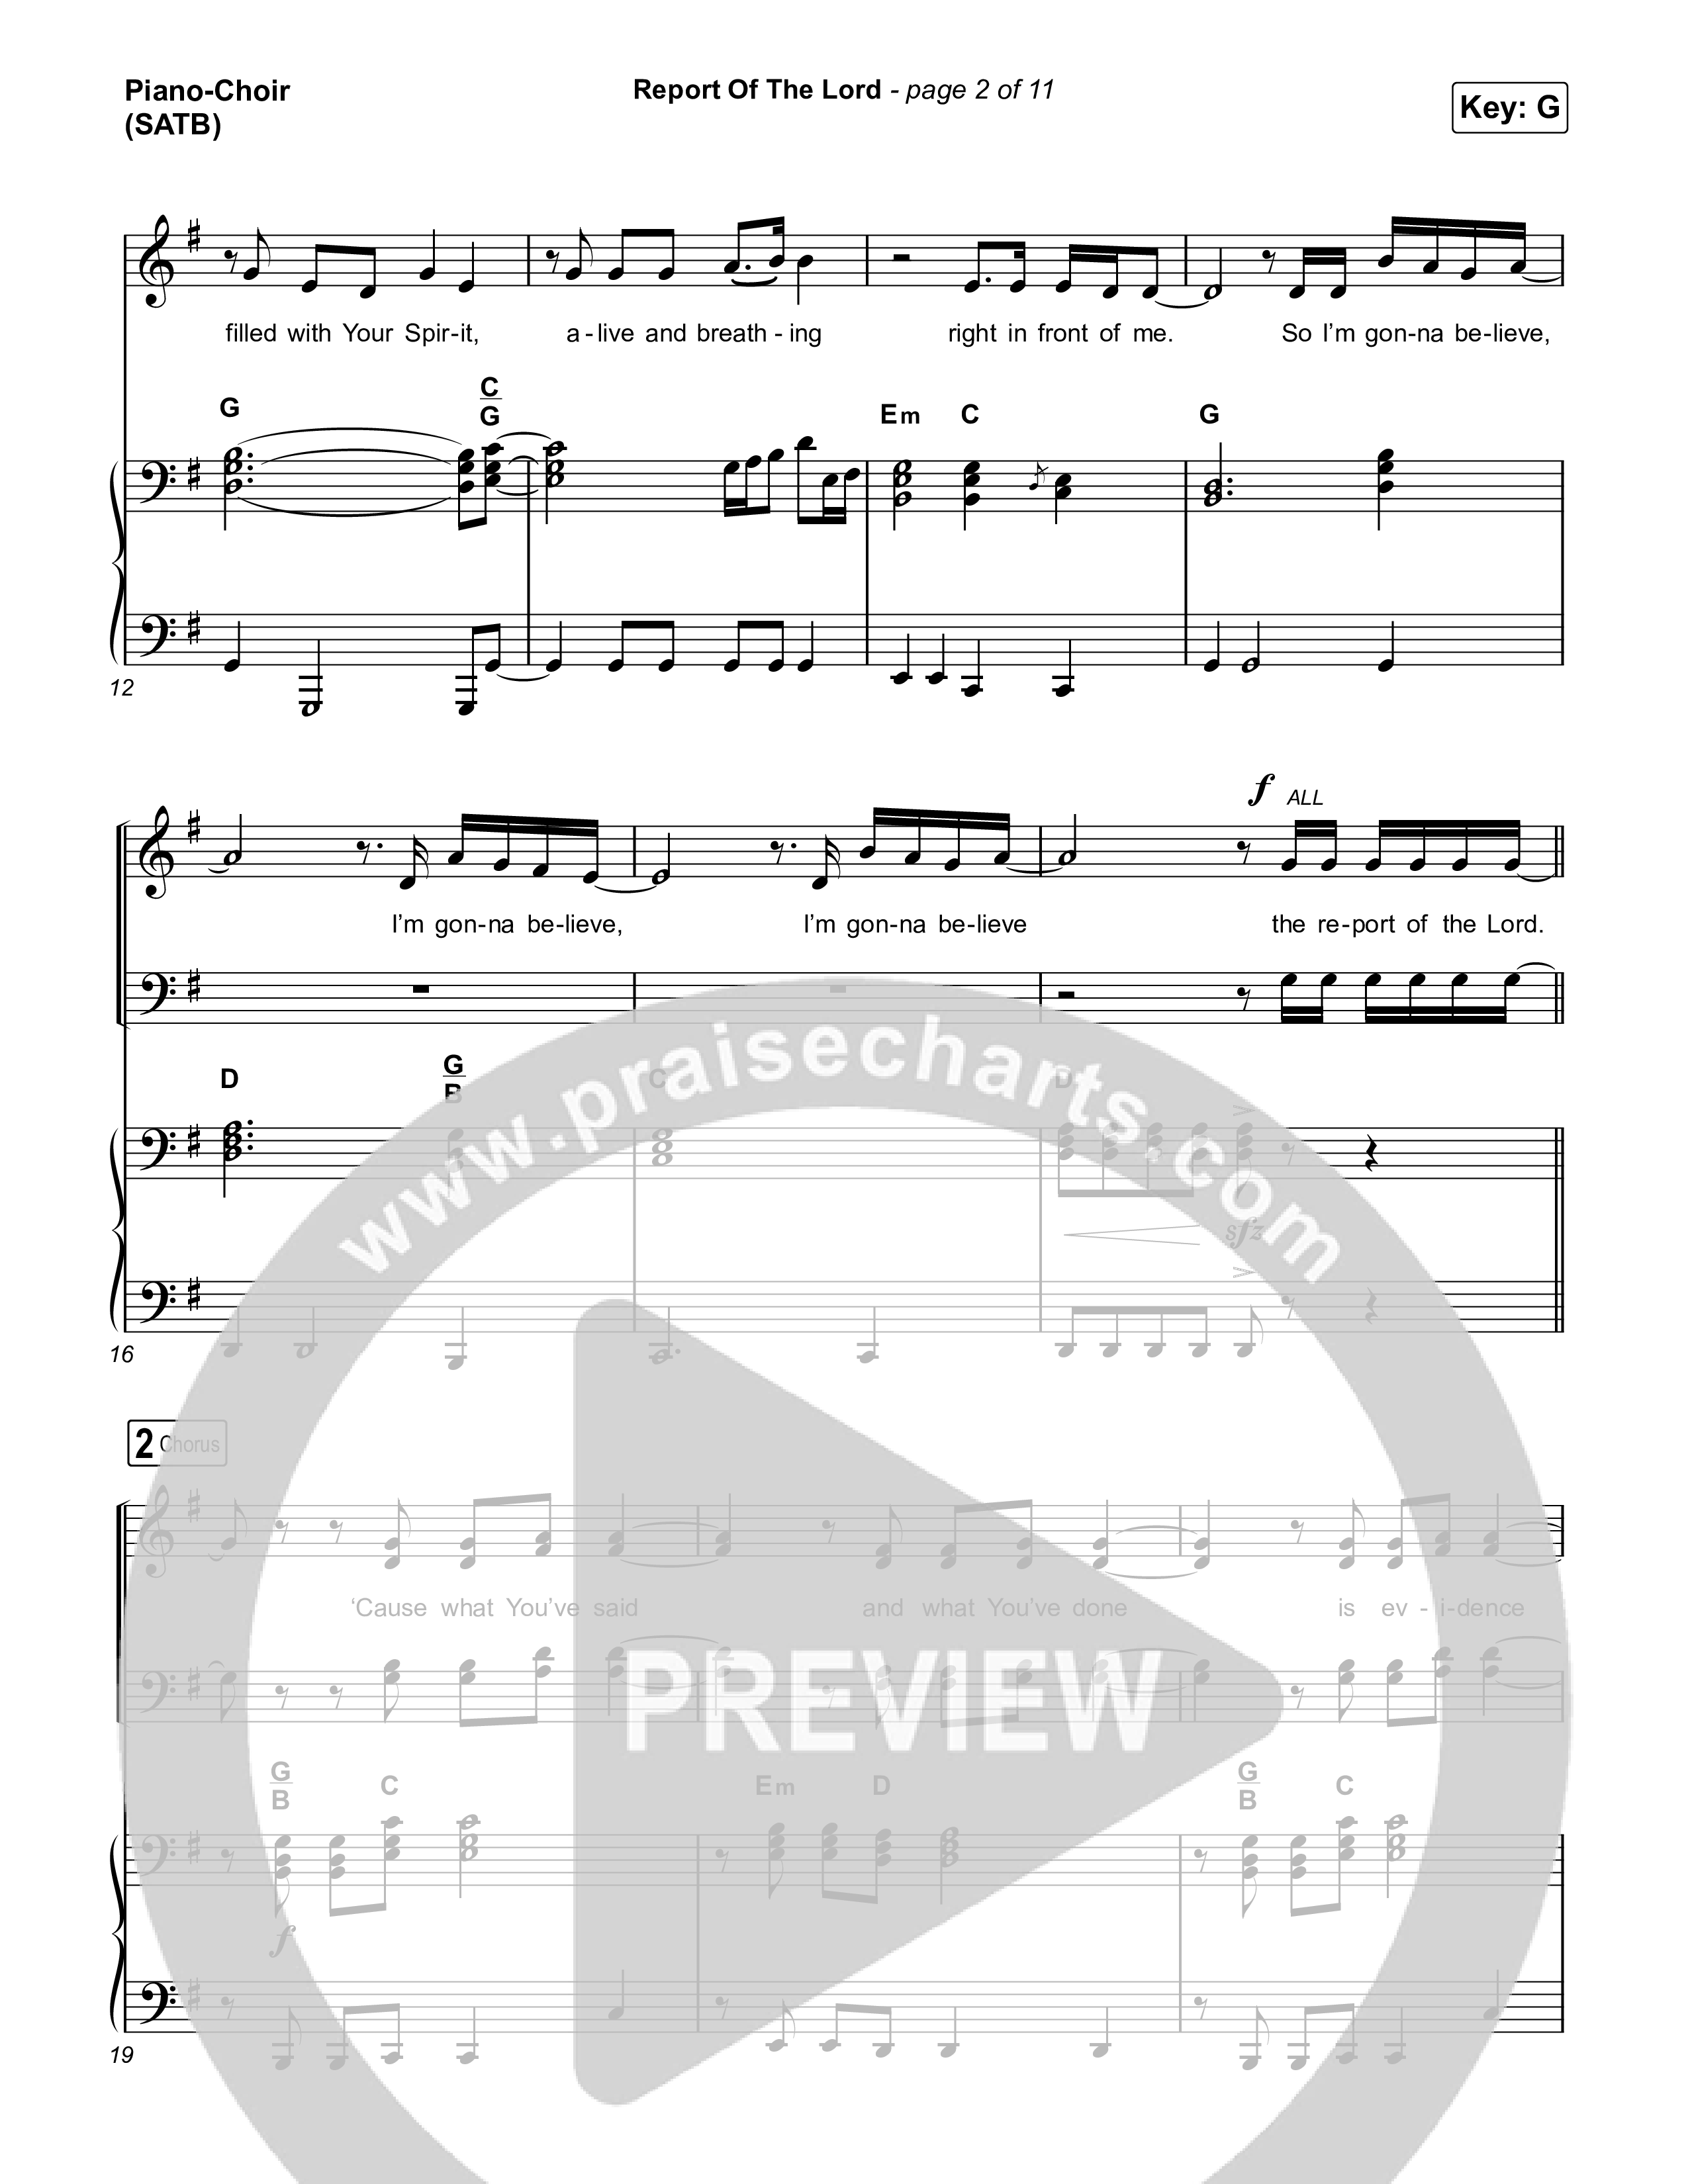 Report Of The Lord Piano/Vocal (SATB) (Charity Gayle)